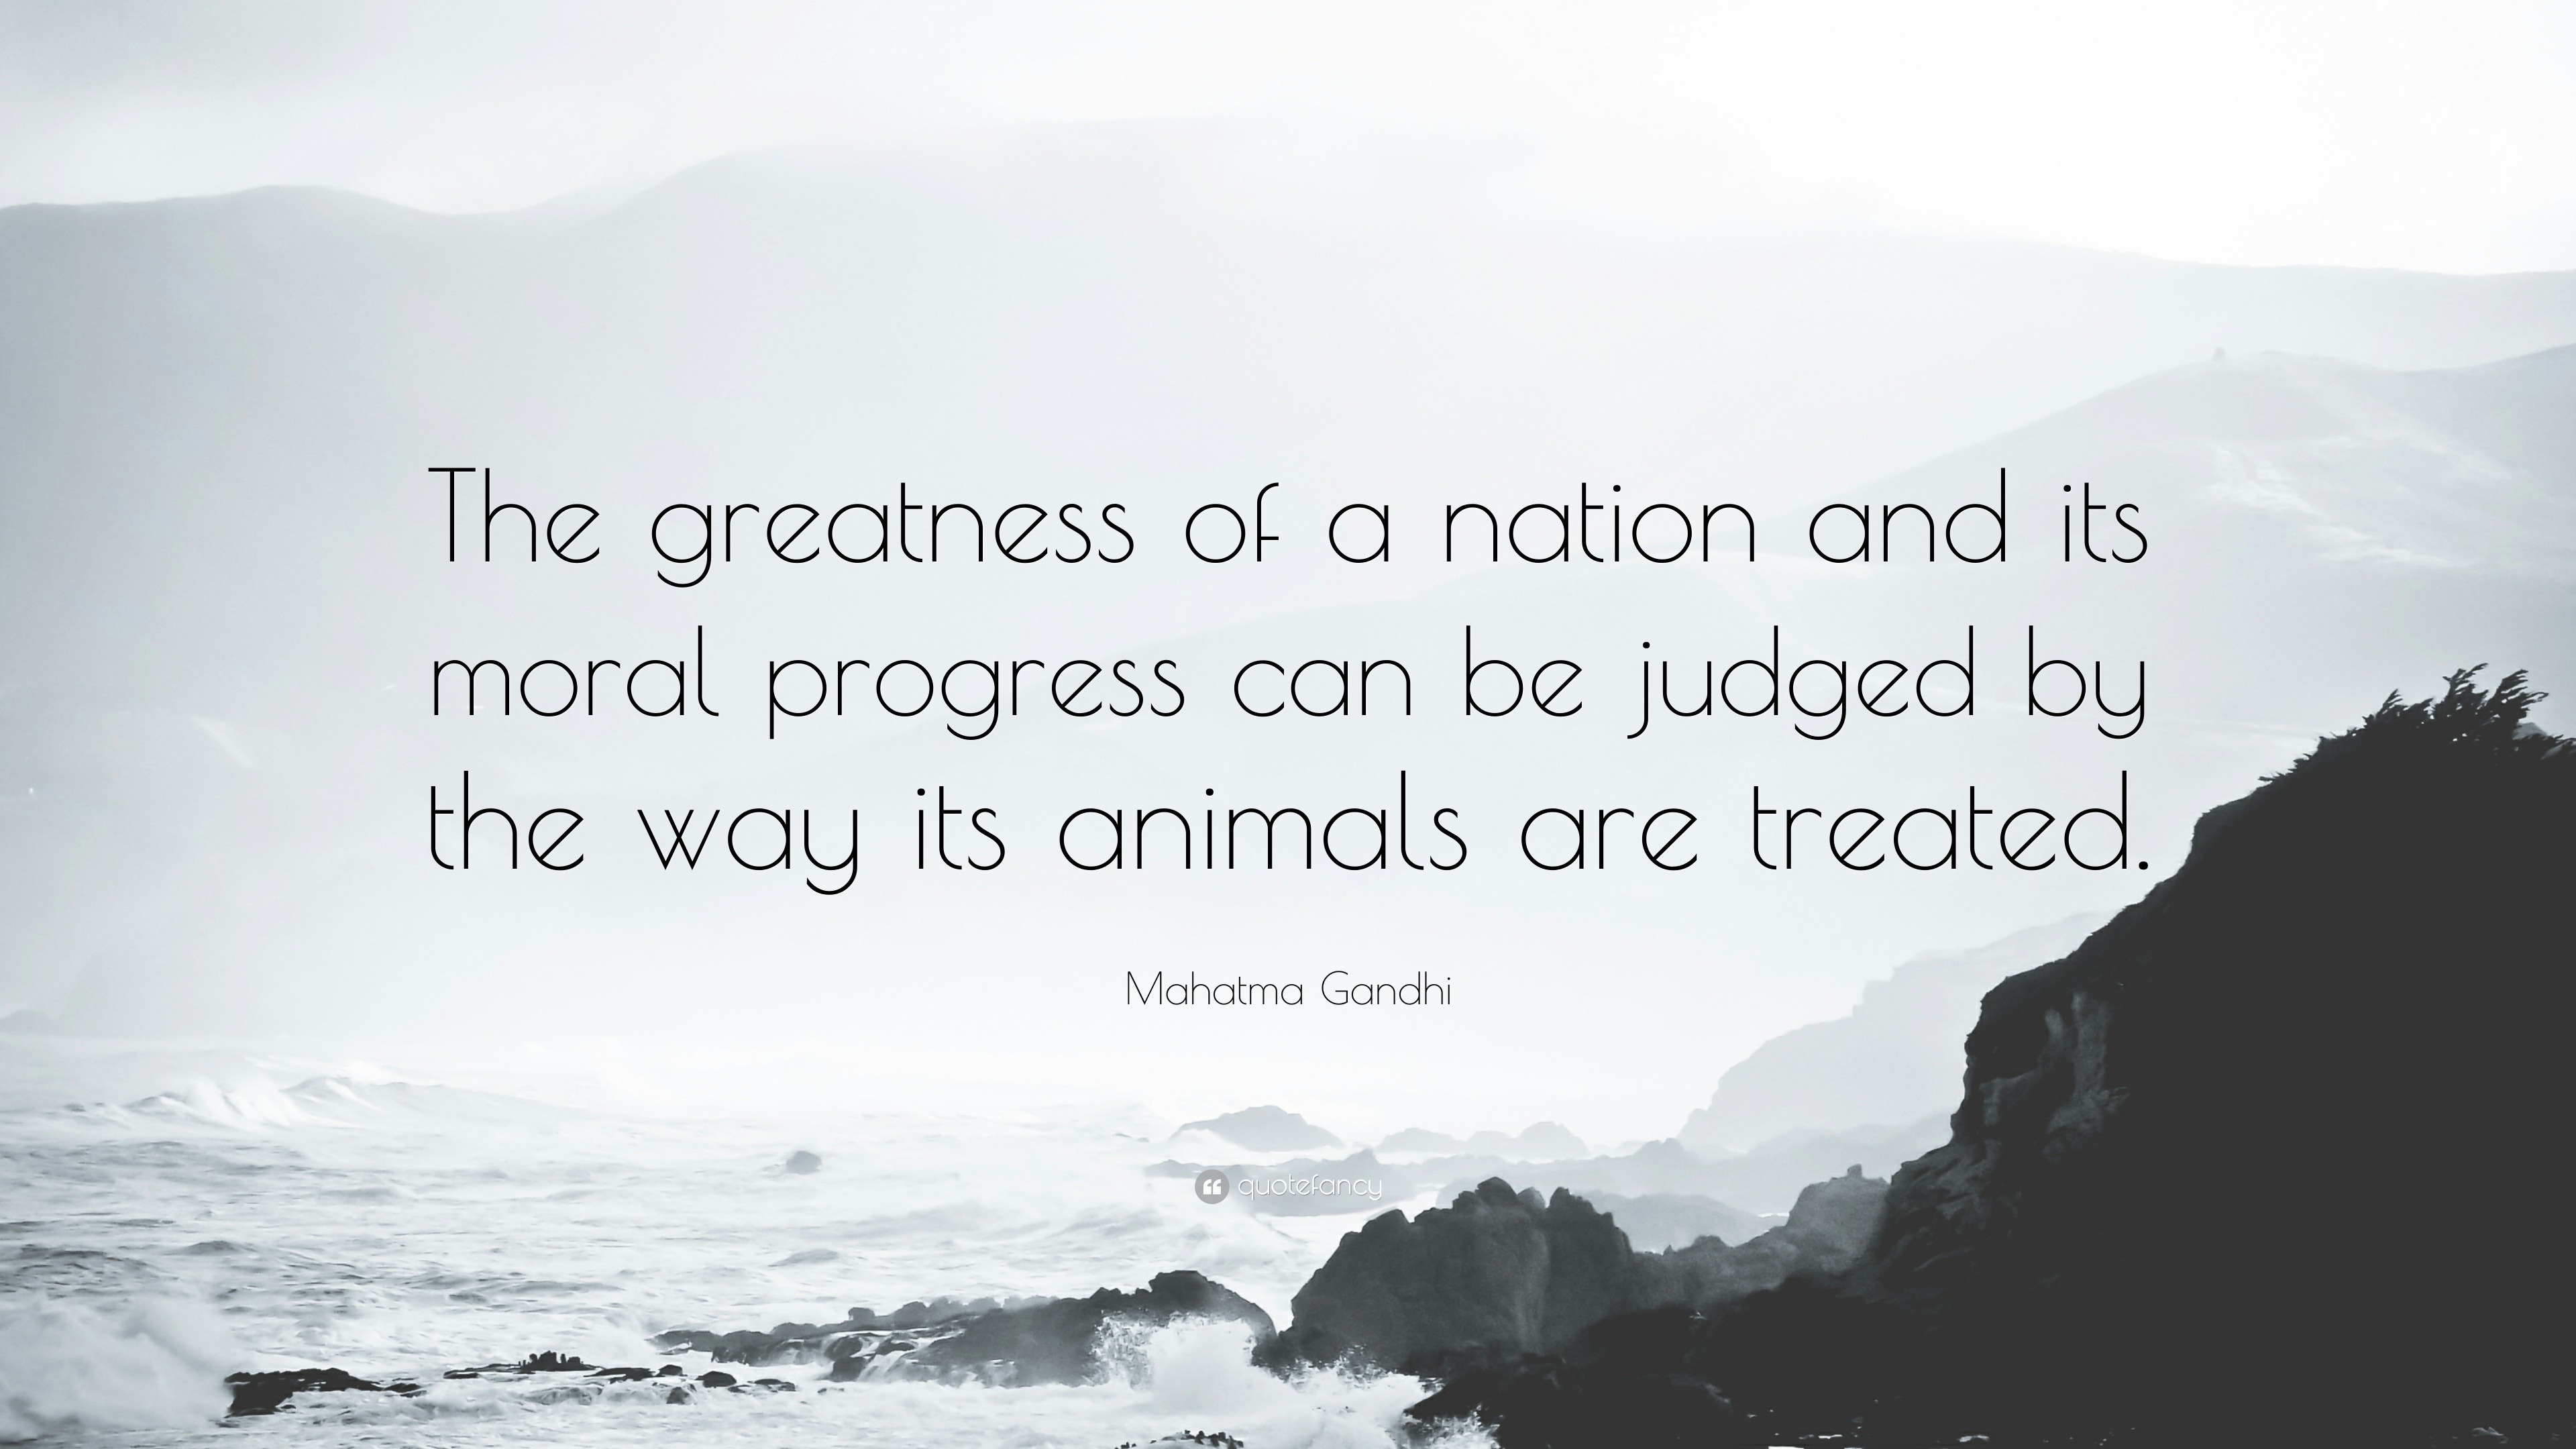 Mahatma Gandhi Quote: “The greatness of a nation and its moral progress can  be judged by